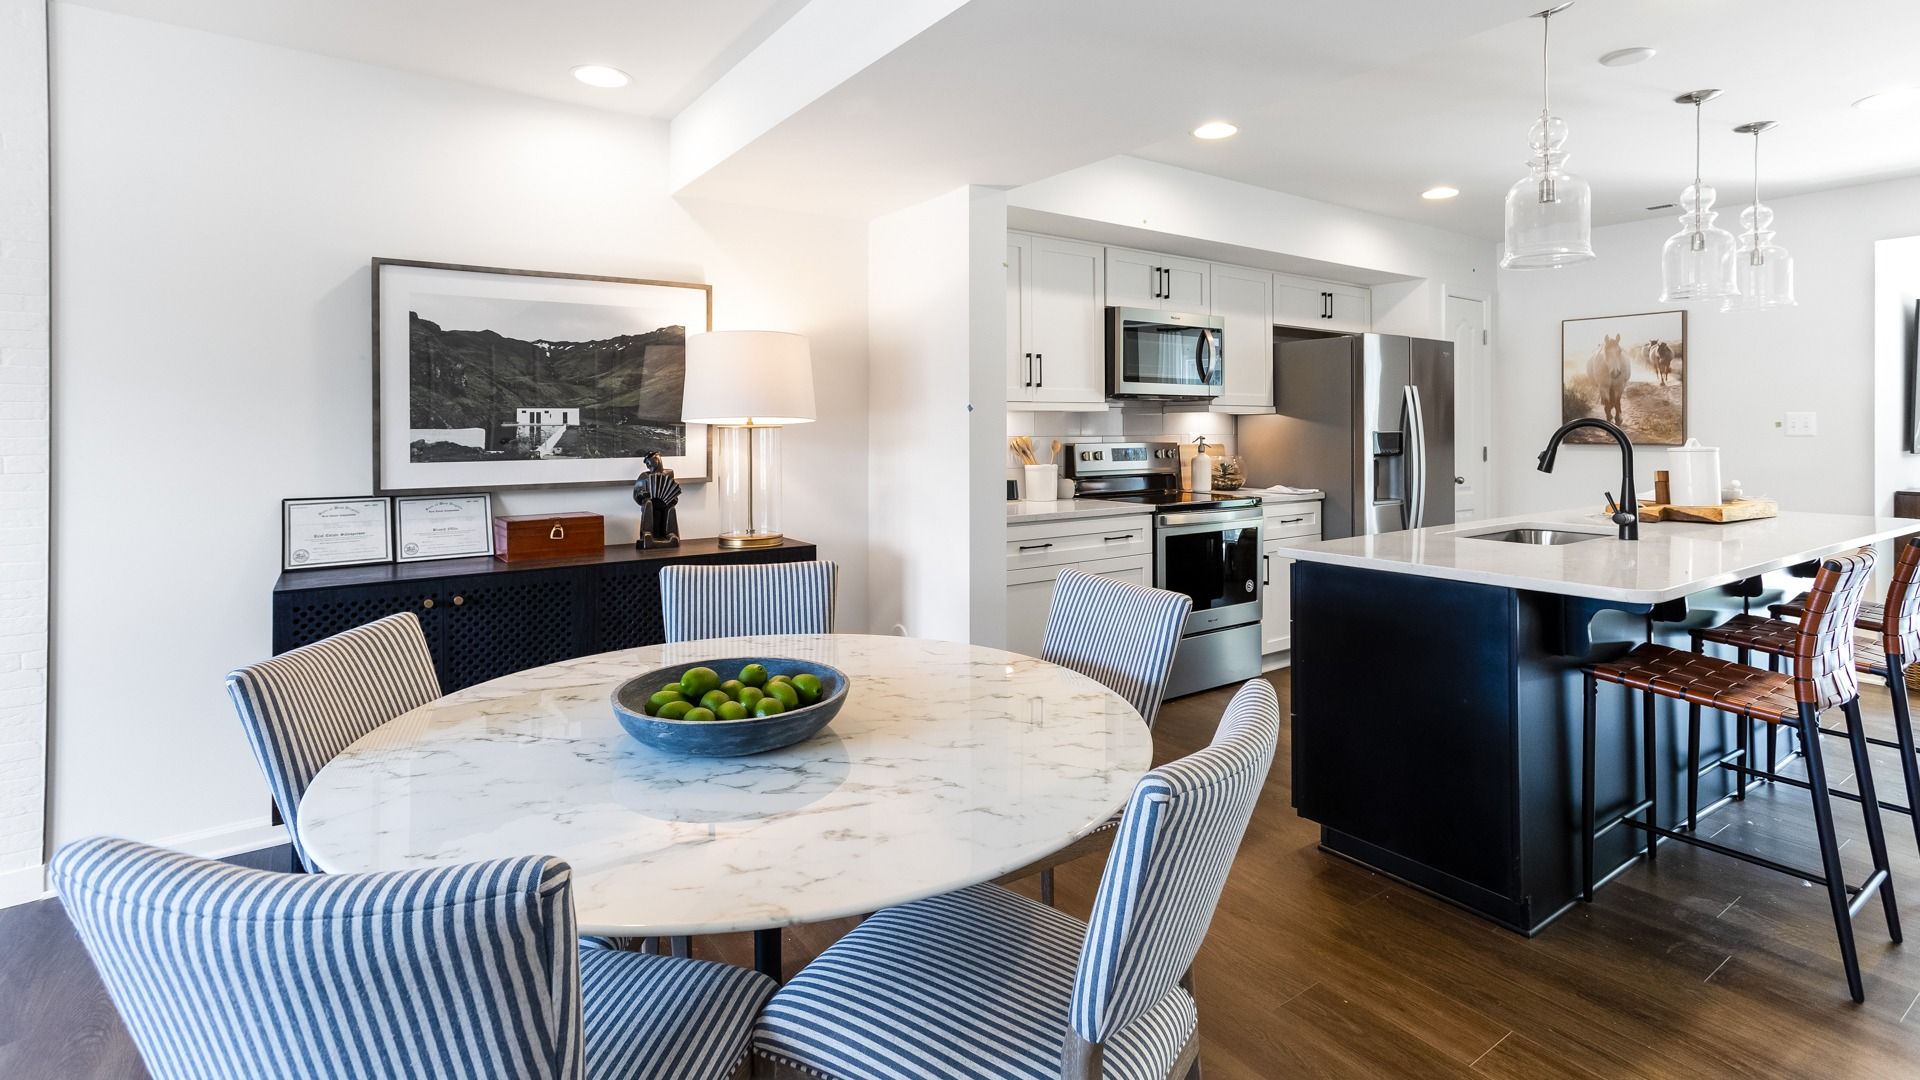 Madison II Model at Whispering Pines - Breakfast Area and Kitchen:Open kitchen and adjoining breakfast area, wood floors, recessed and pendant lighting.